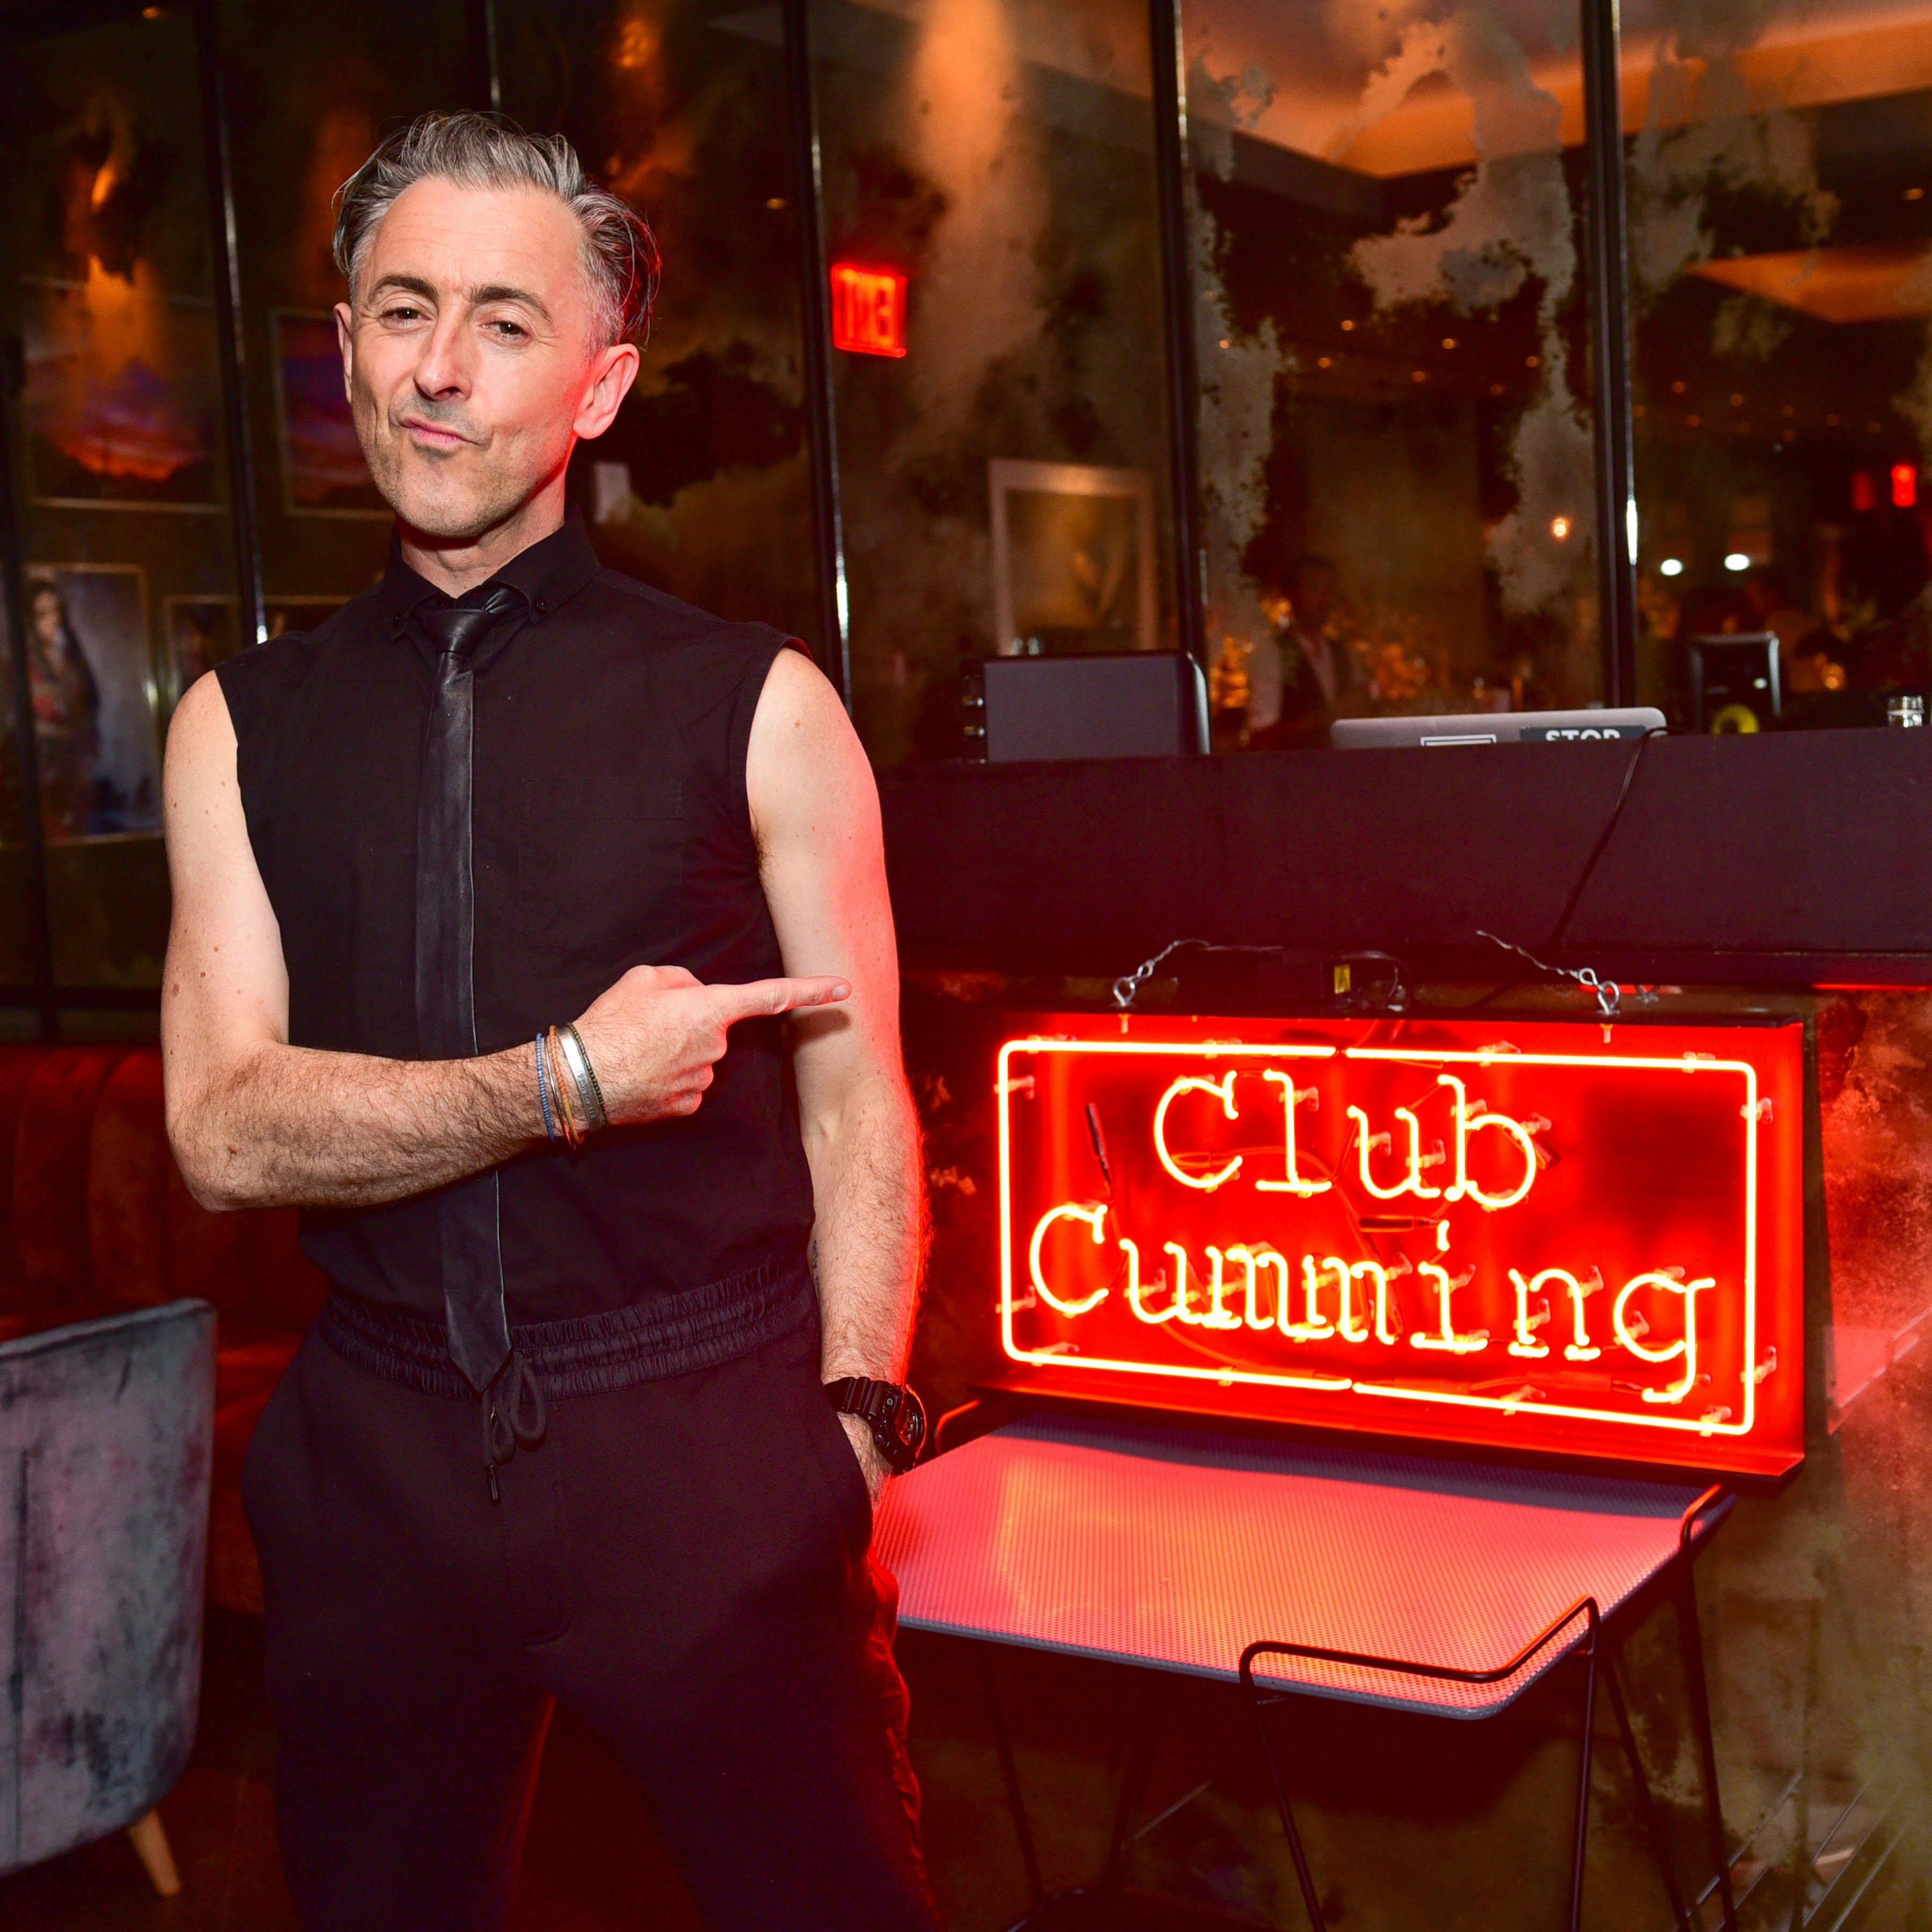 'Stich and Bitch' knitting classes are on offer at NYC's Club Cumming